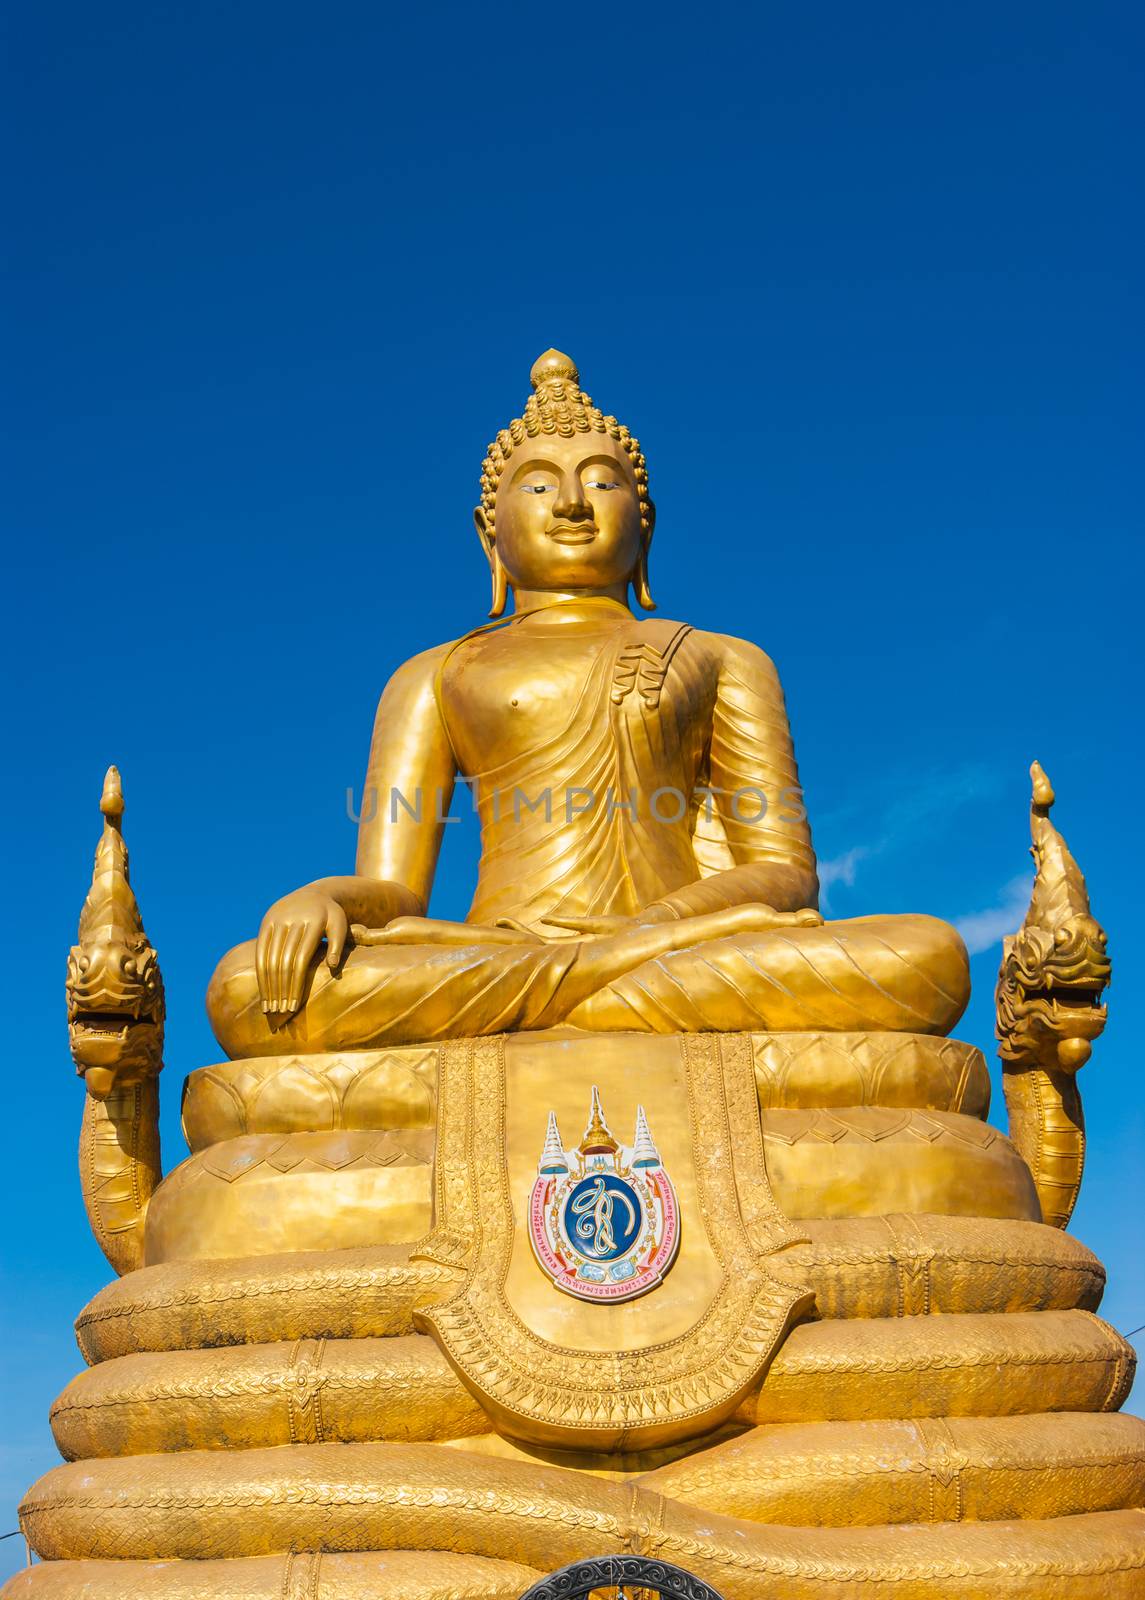 12 meters high Big Buddha Image, made of 22 tons of brass in Phuket,Thailand